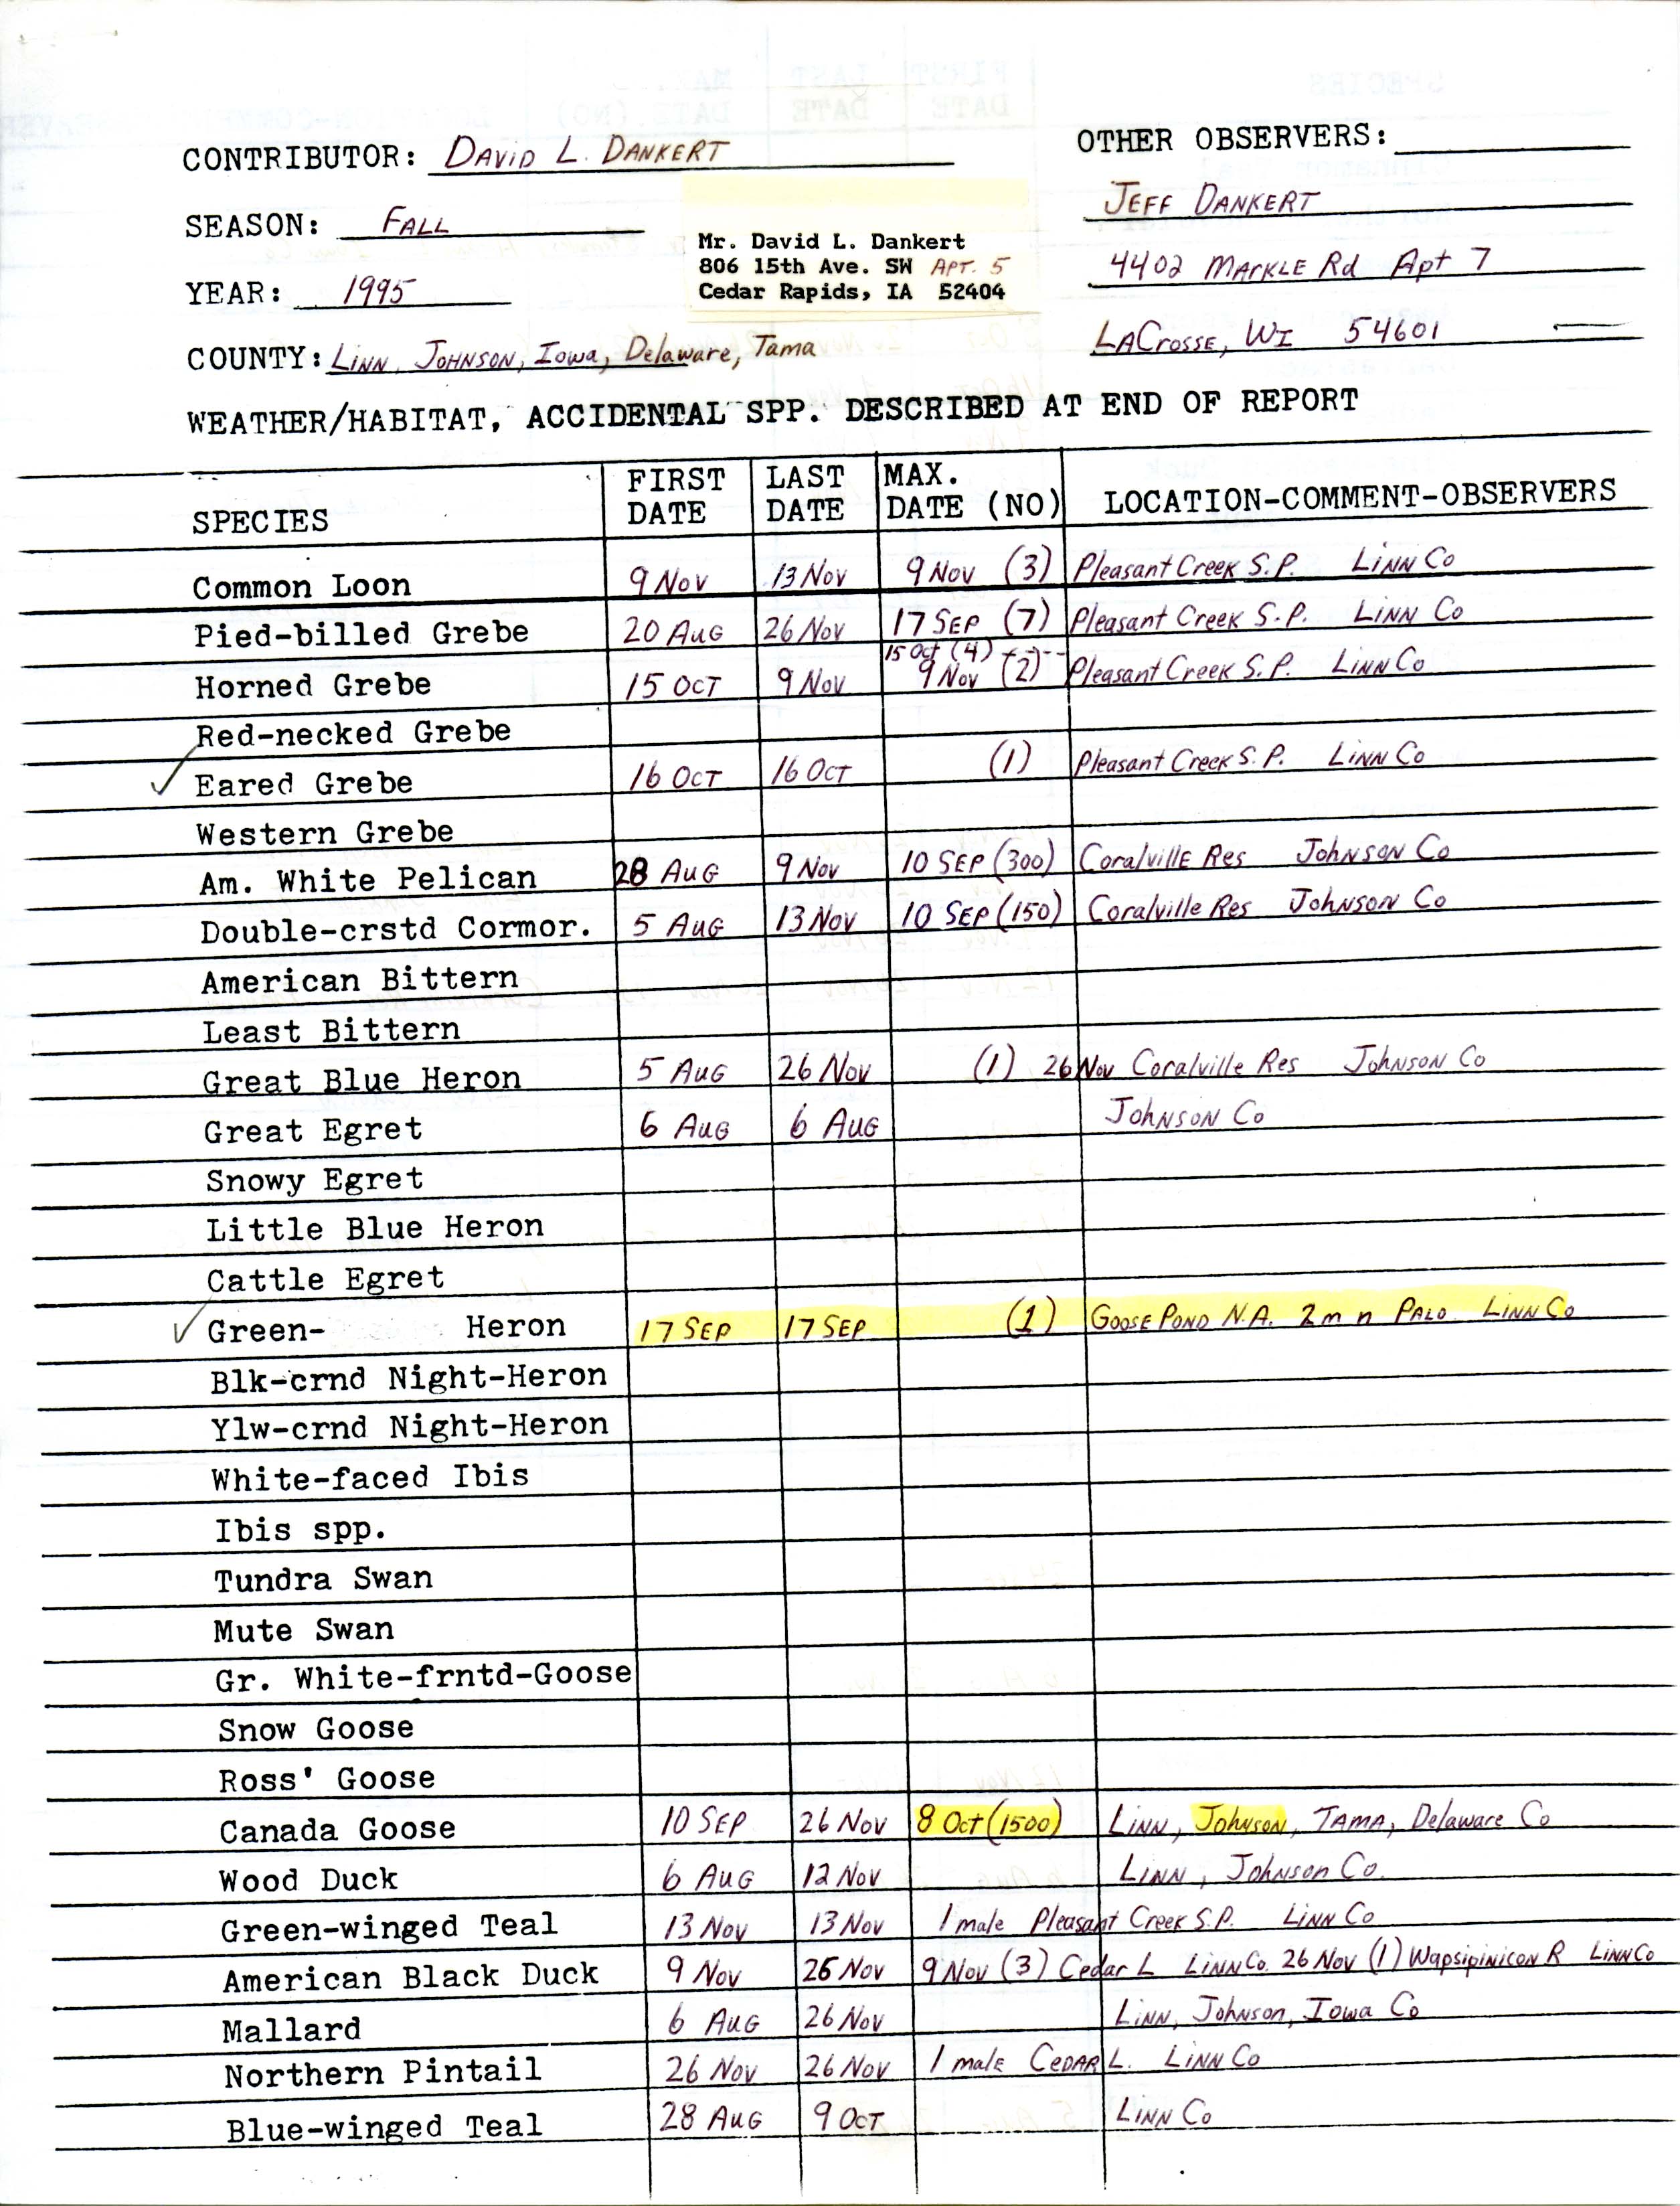 Field notes contributed by David L. Dankert, fall 1995